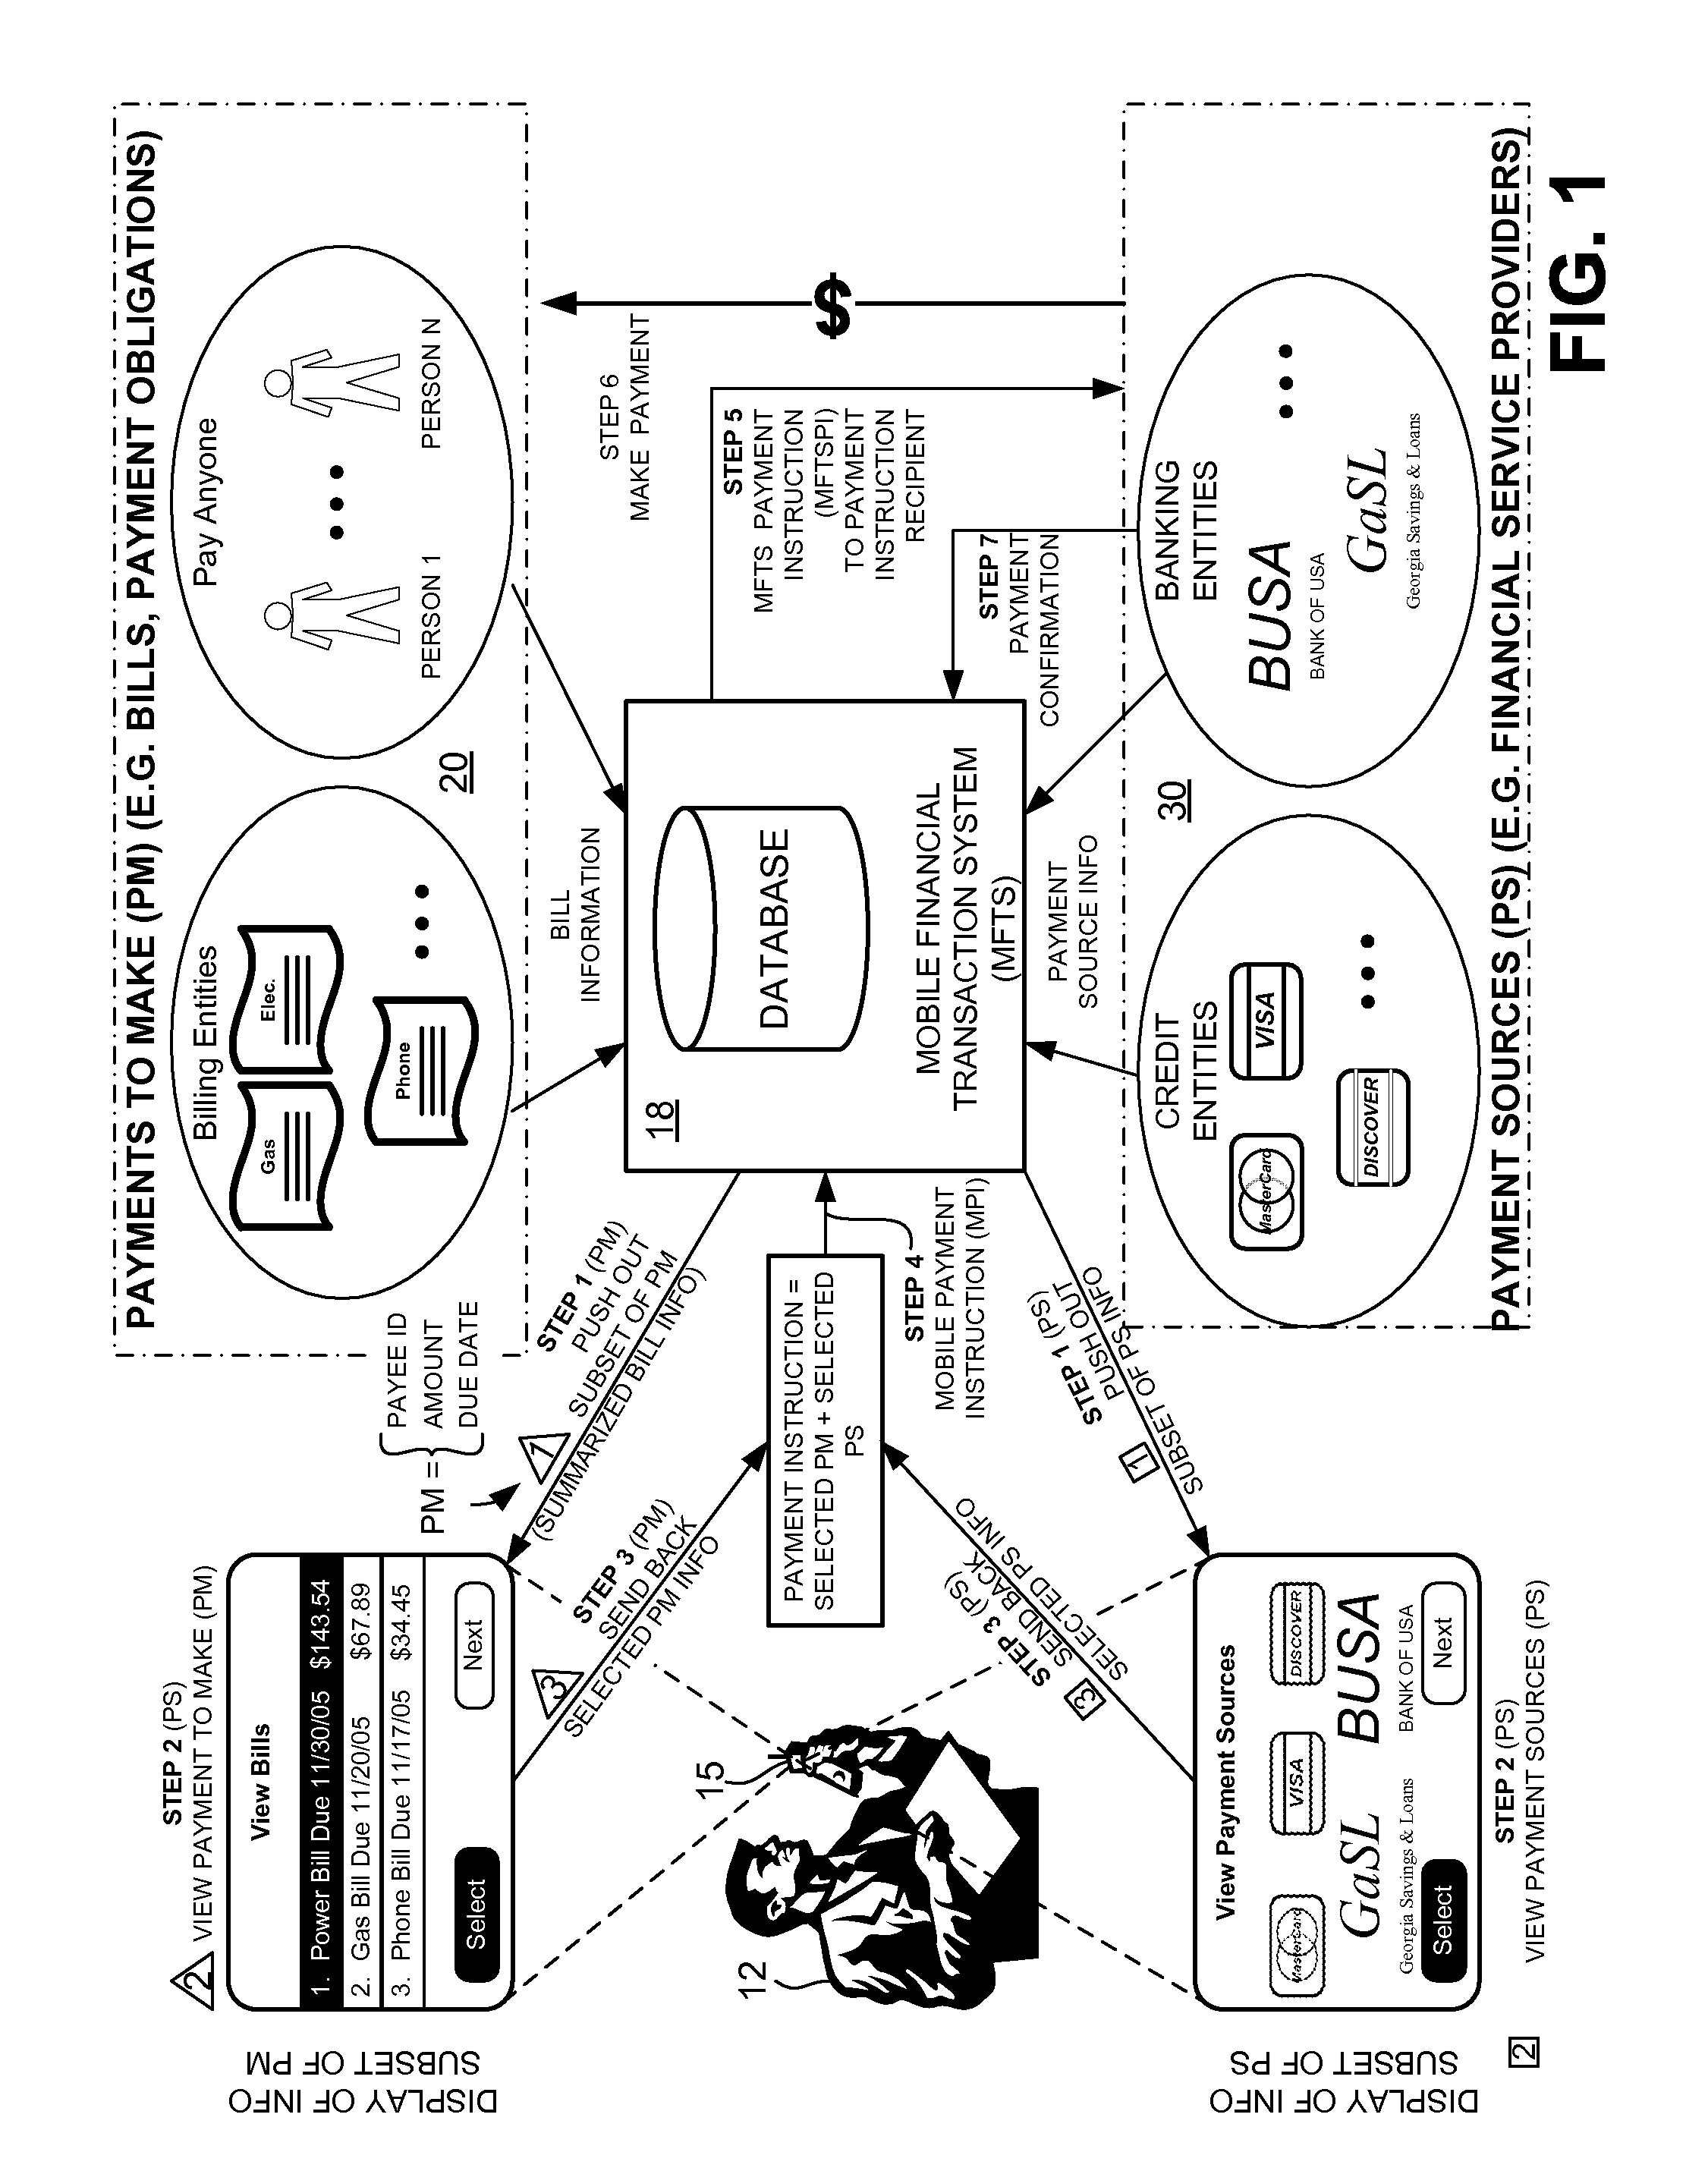 Methods and Systems For Viewing Aggregated Payment Obligations in a Mobile Environment